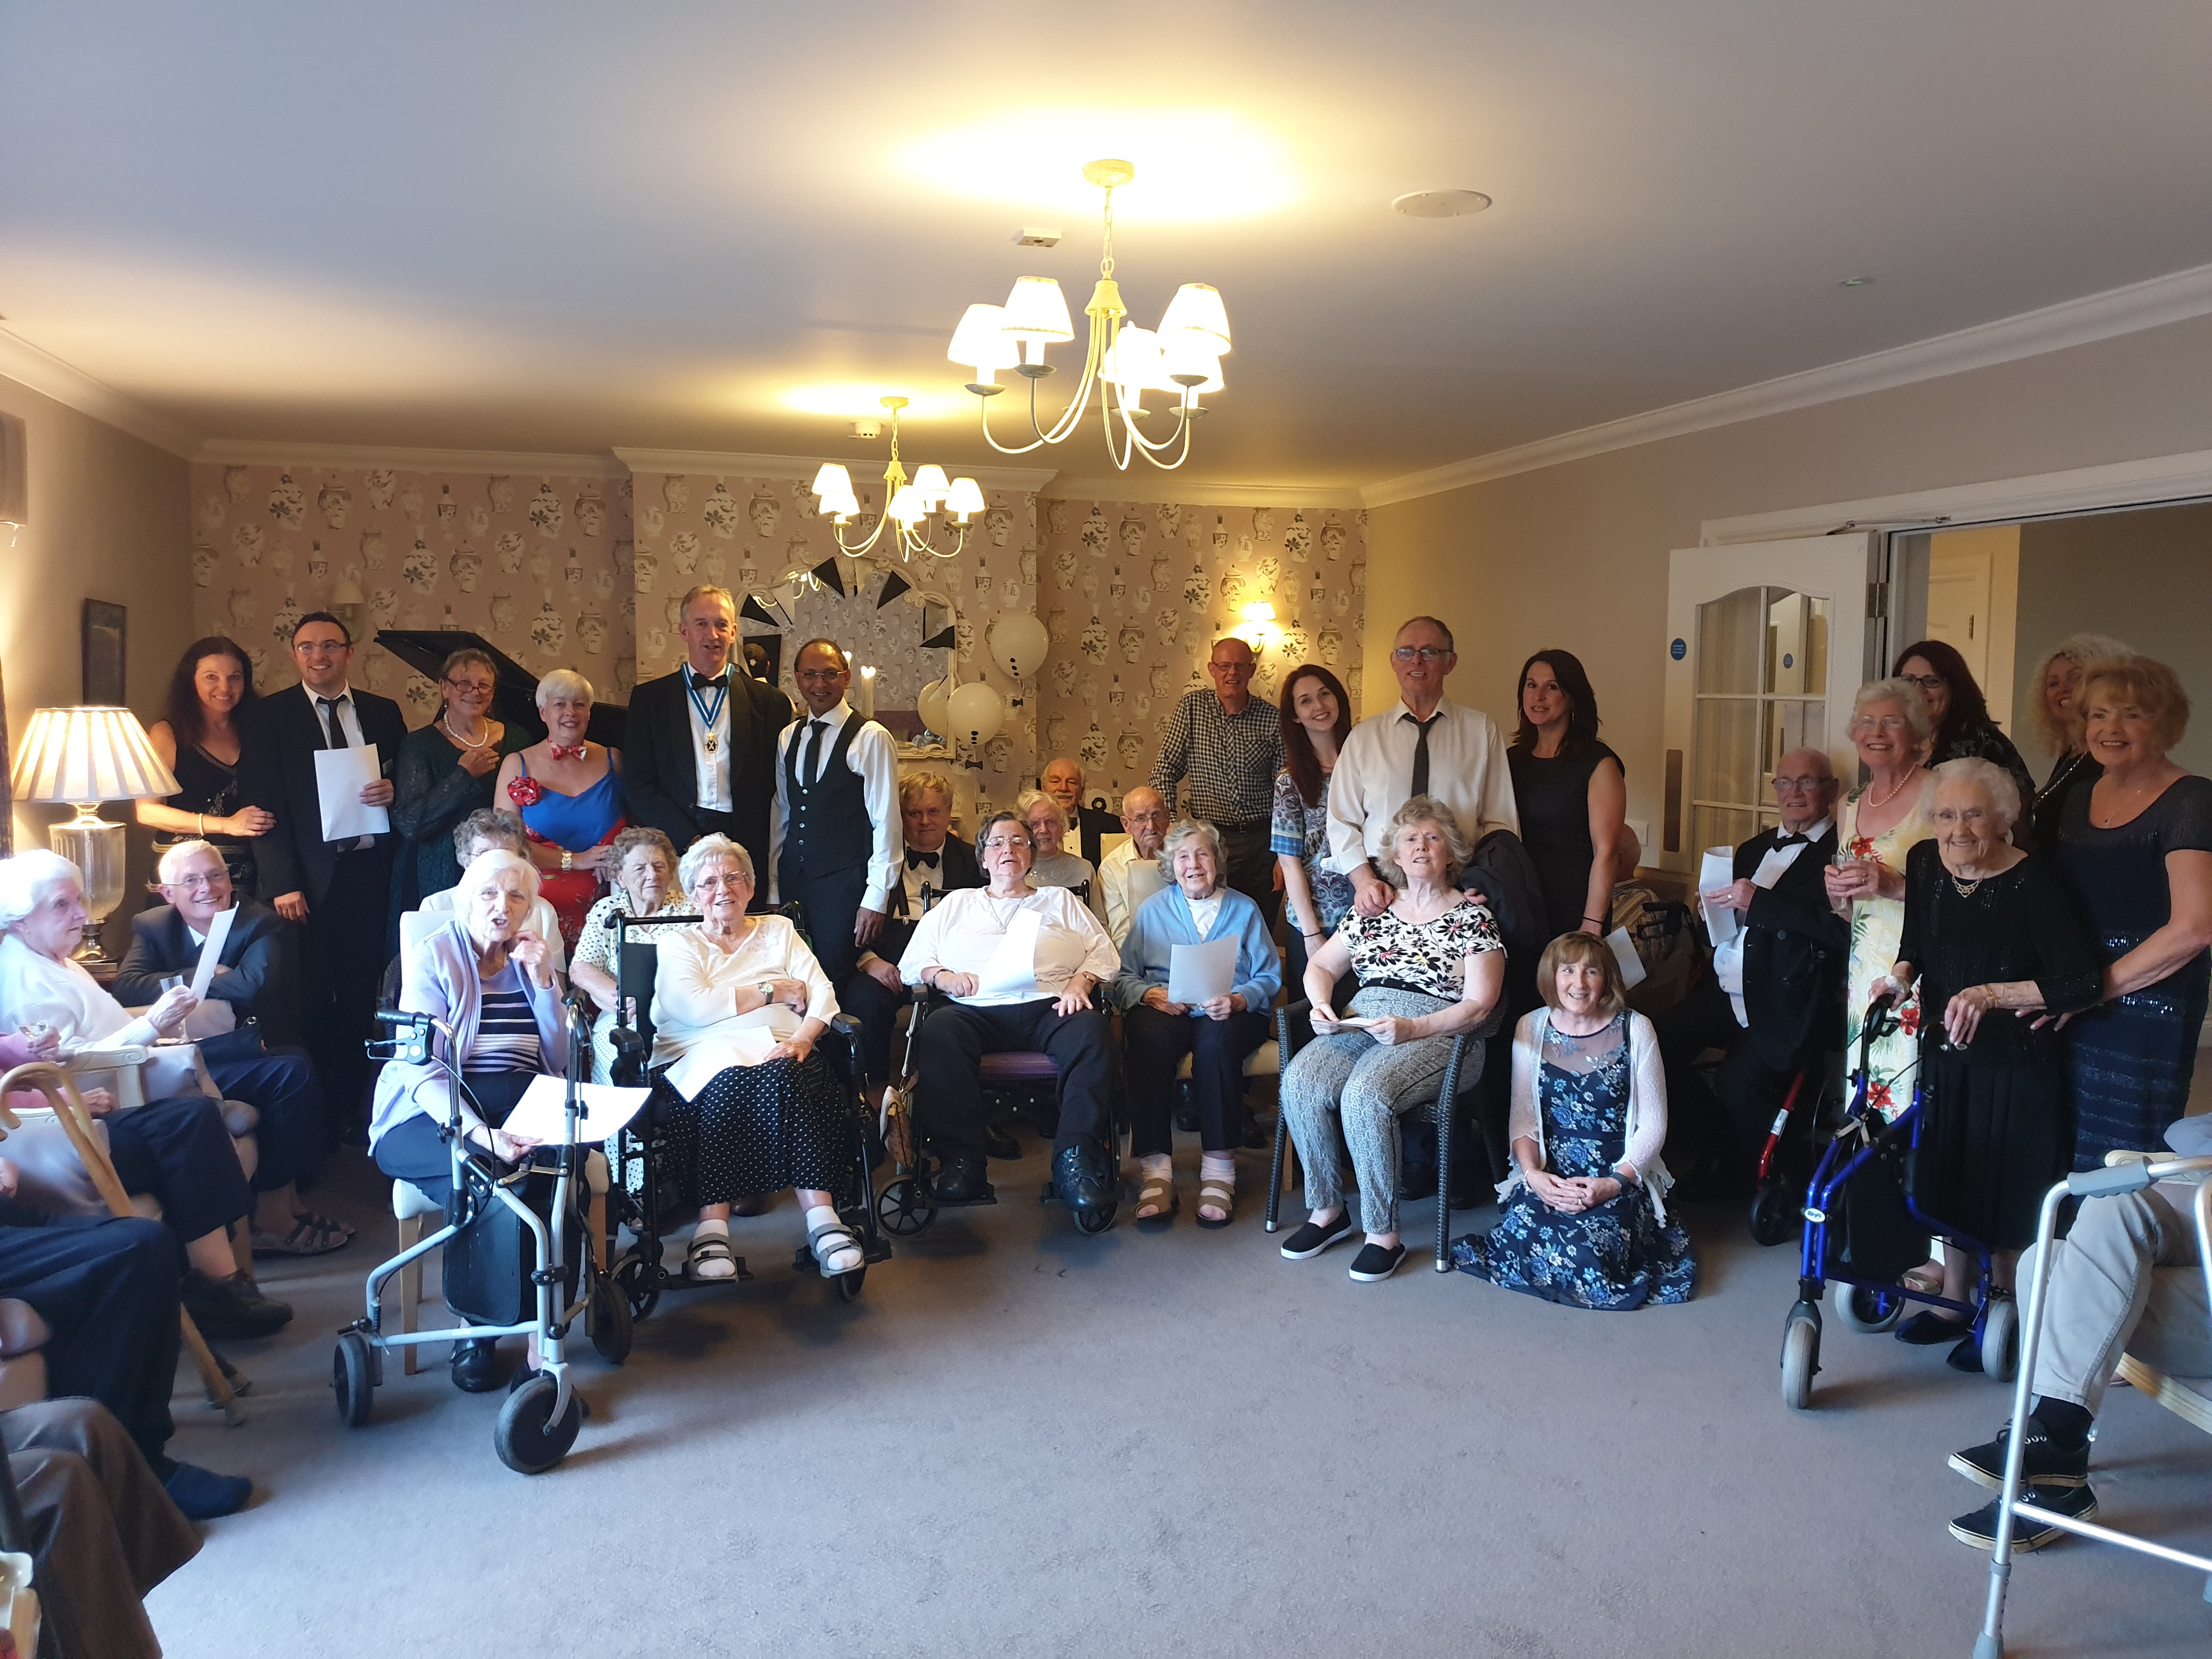 Belvedere Manor residents dress up in black tie and cocktail dresses for event with Lancashire High Sherrif